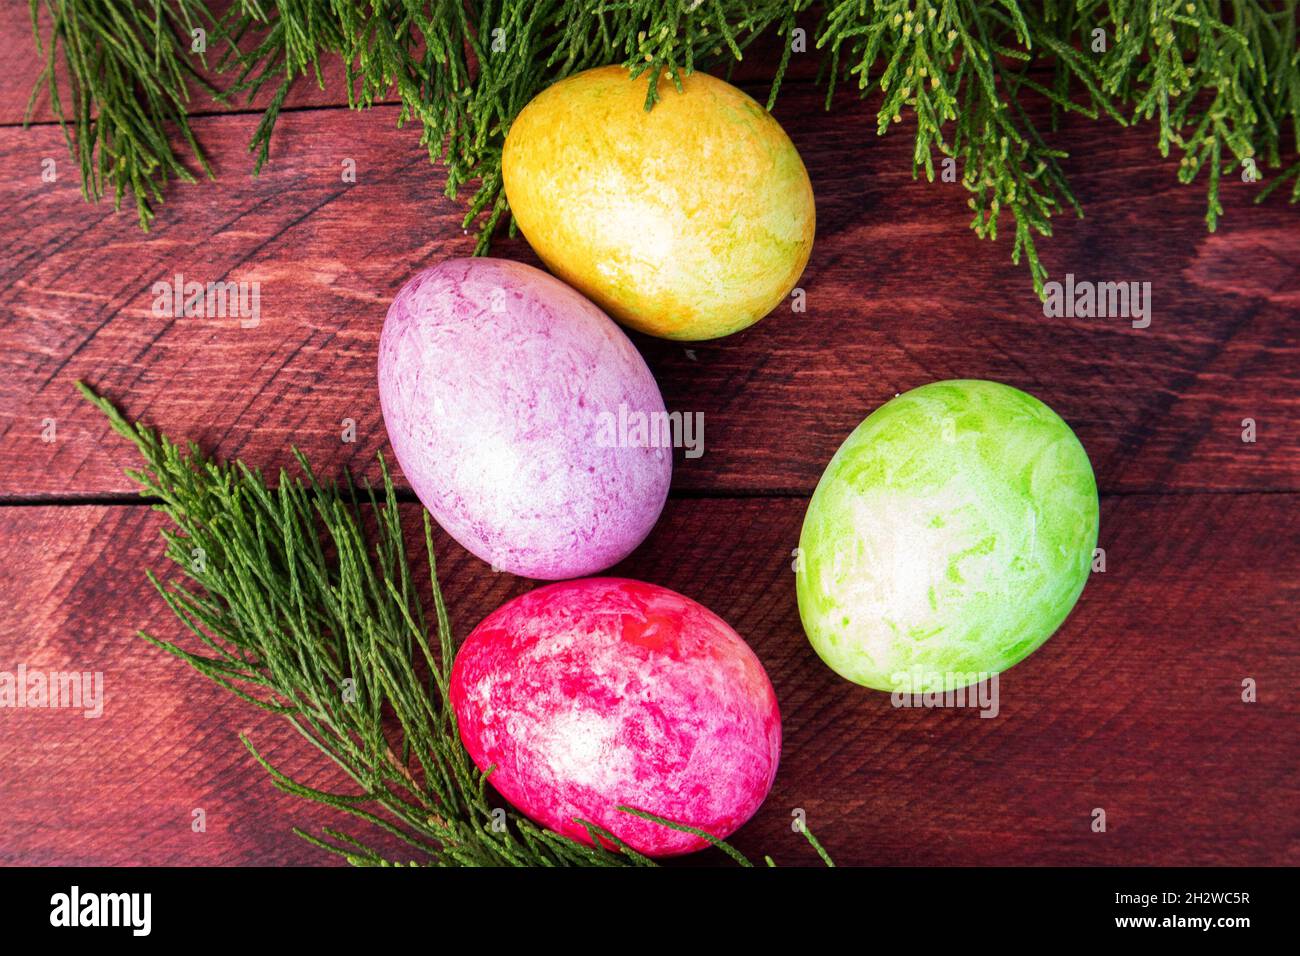 Four multicolored bright easter eggs and thuja branch lying on red wood deck Stock Photo